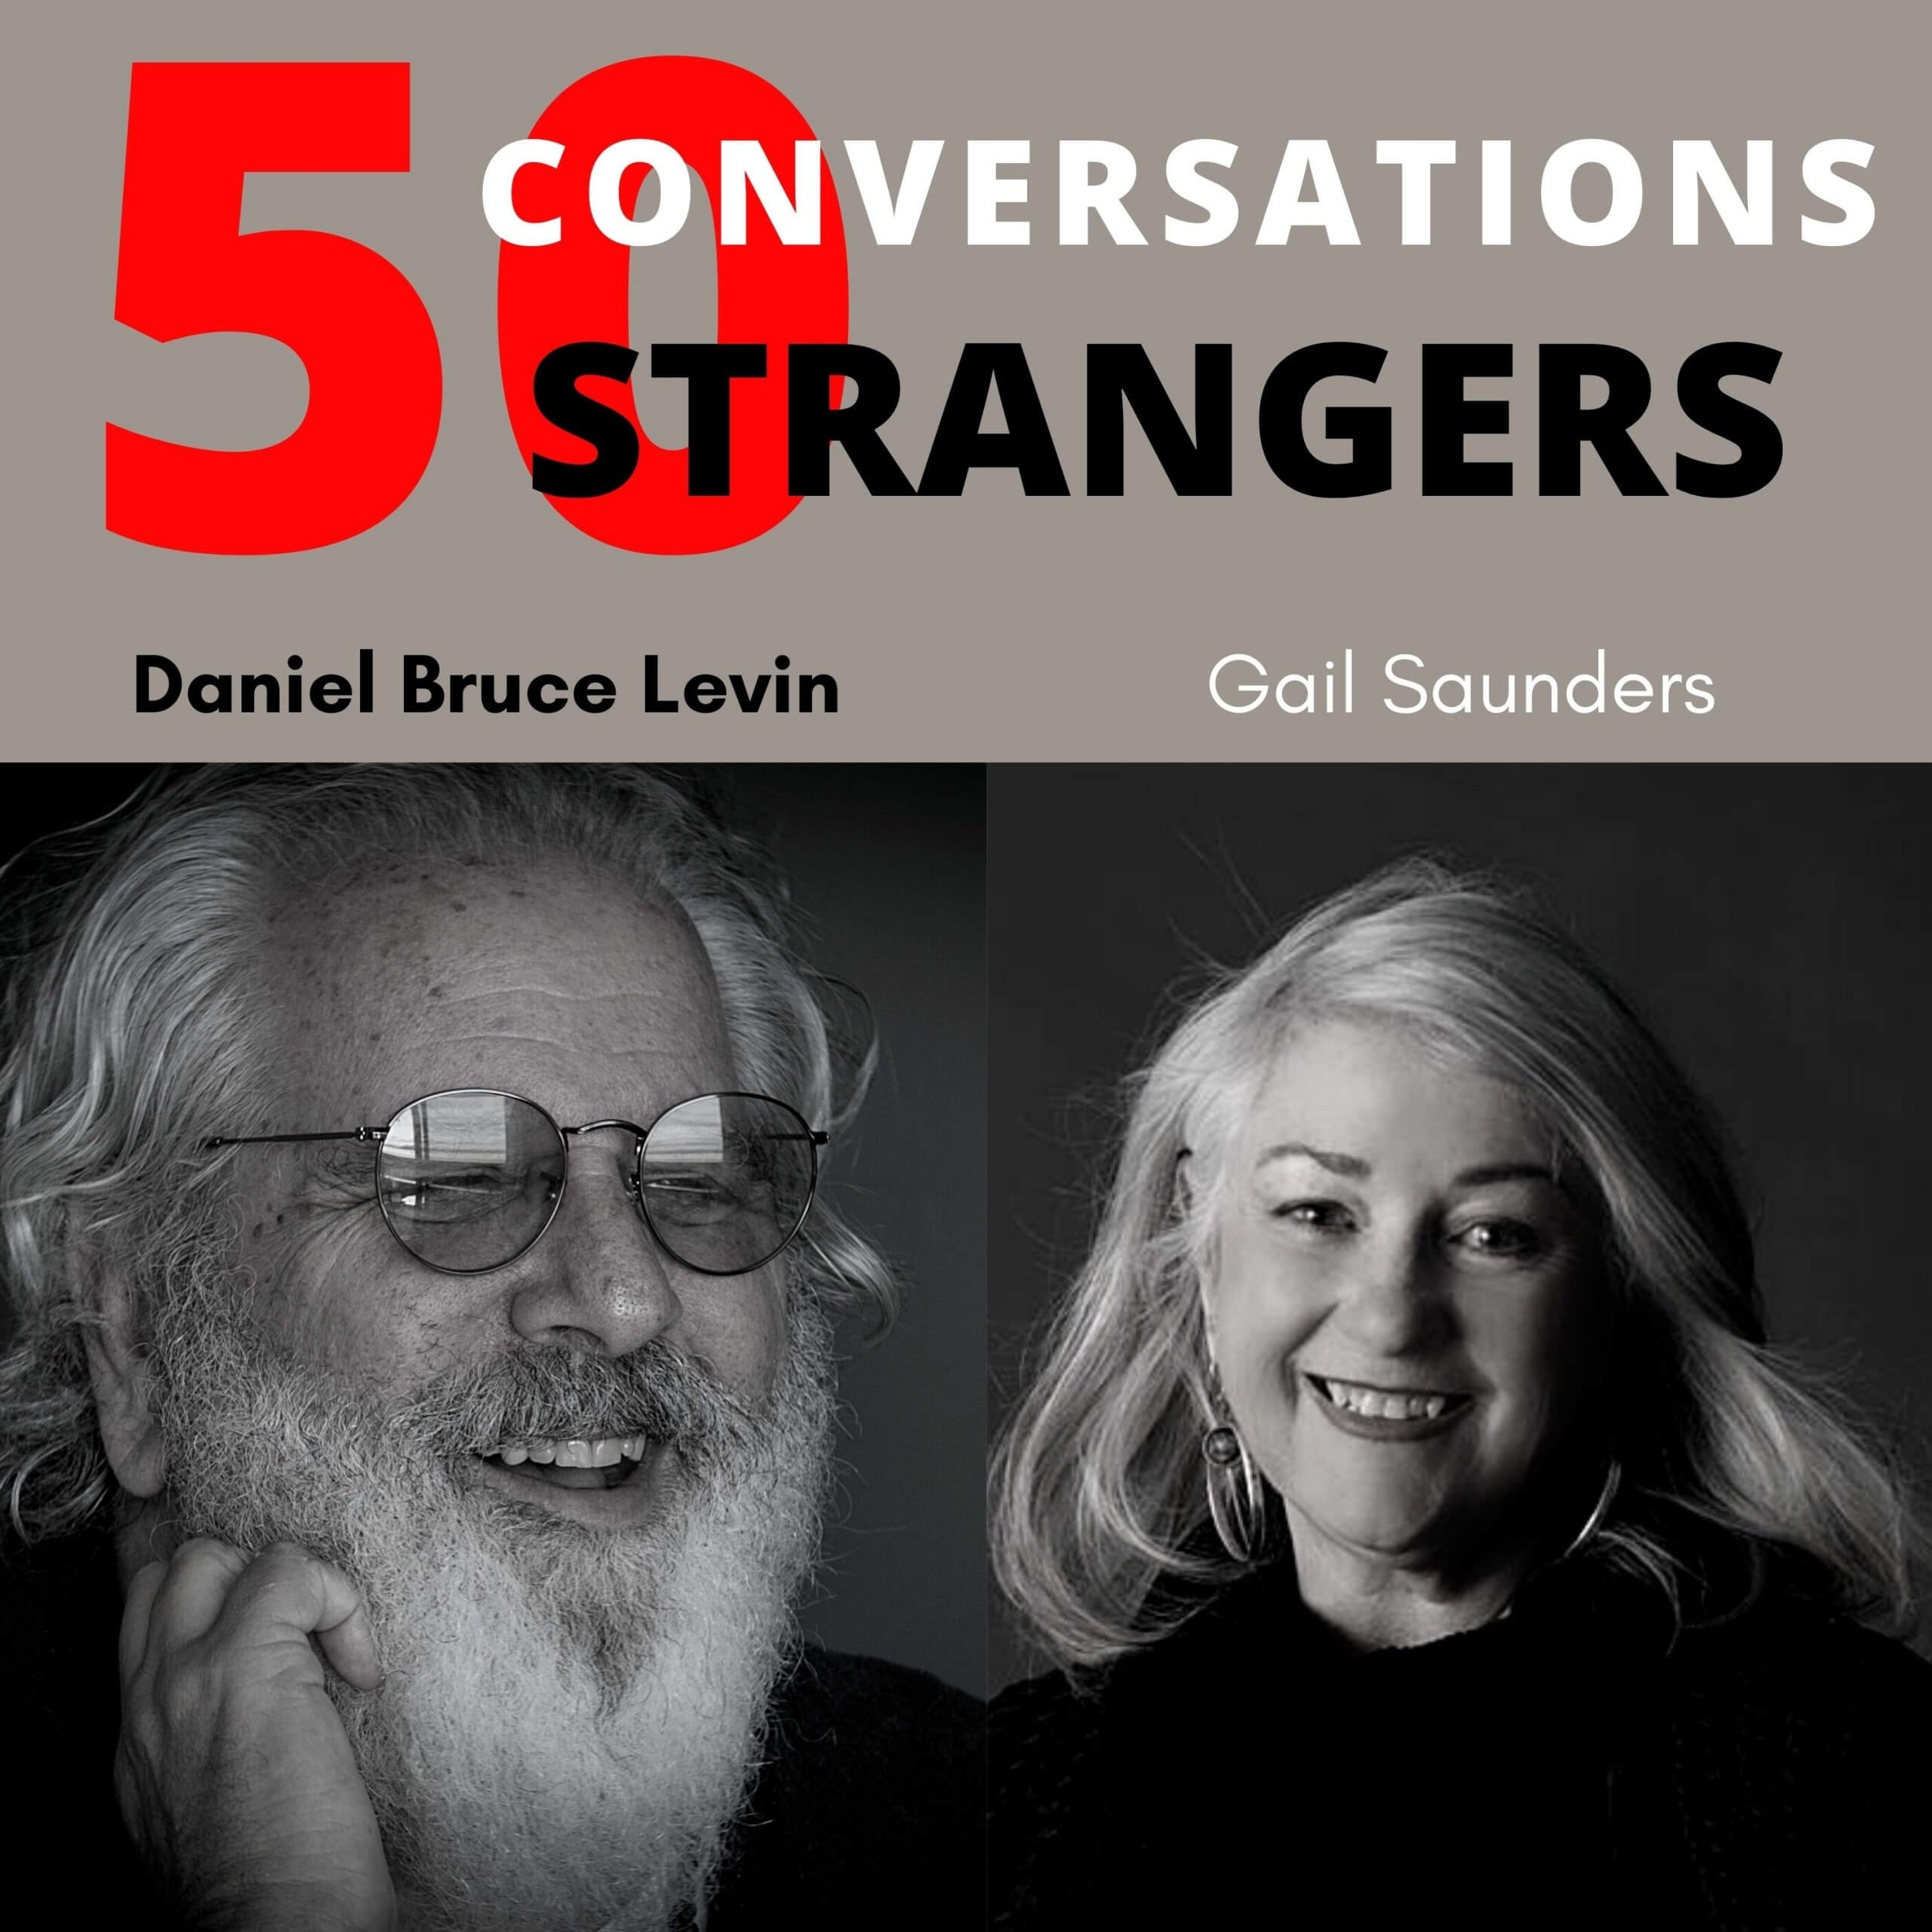 50 Conversations with 50 Strangers with Gail Saunders